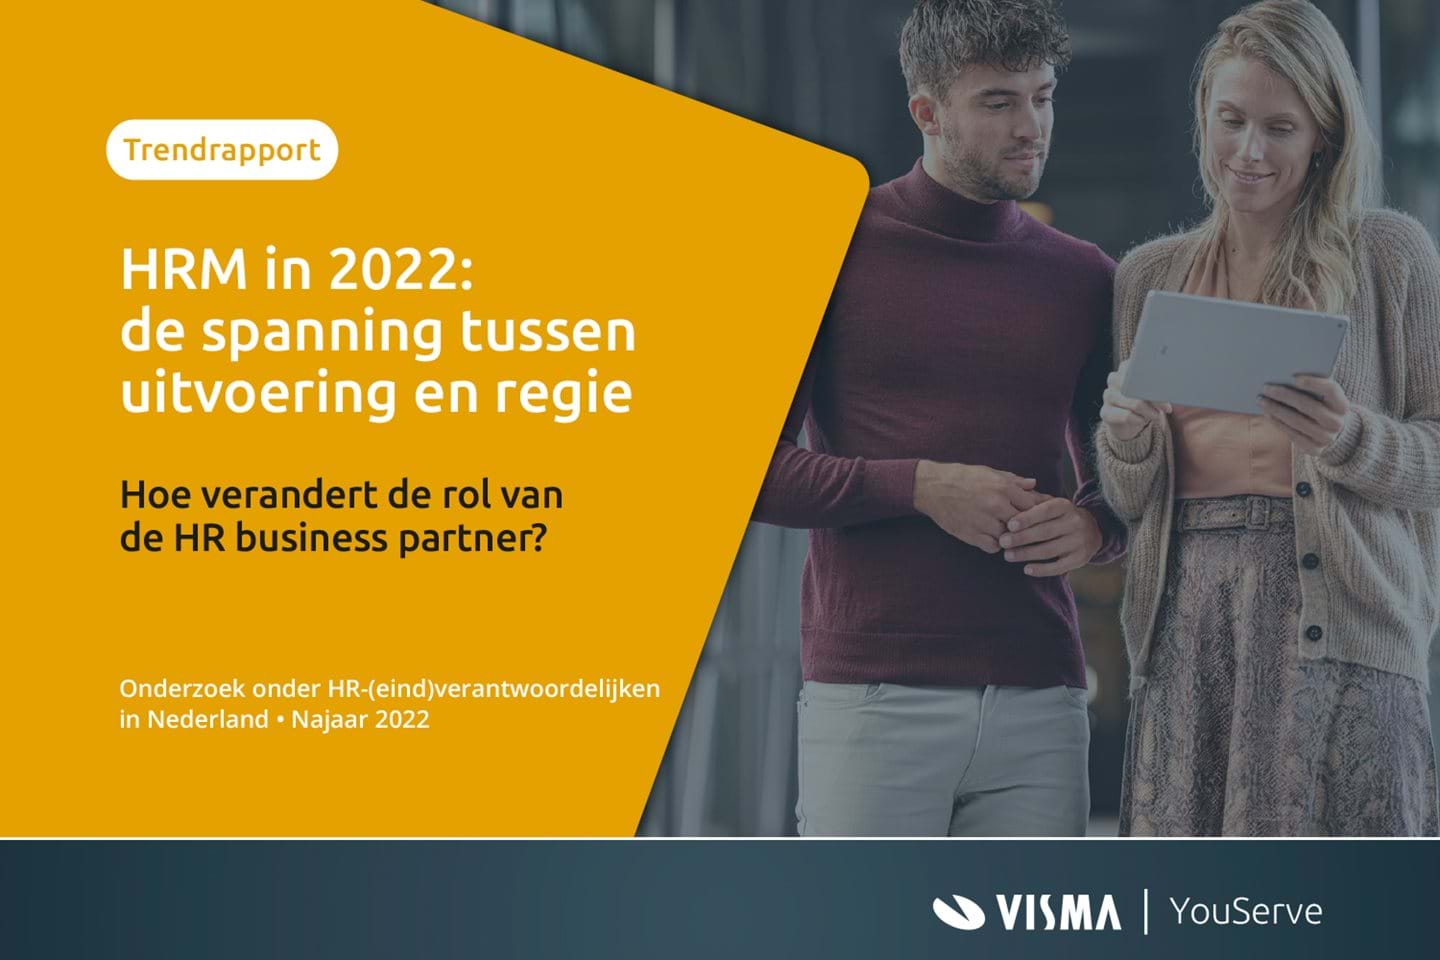 trendrapport HRM in 2022